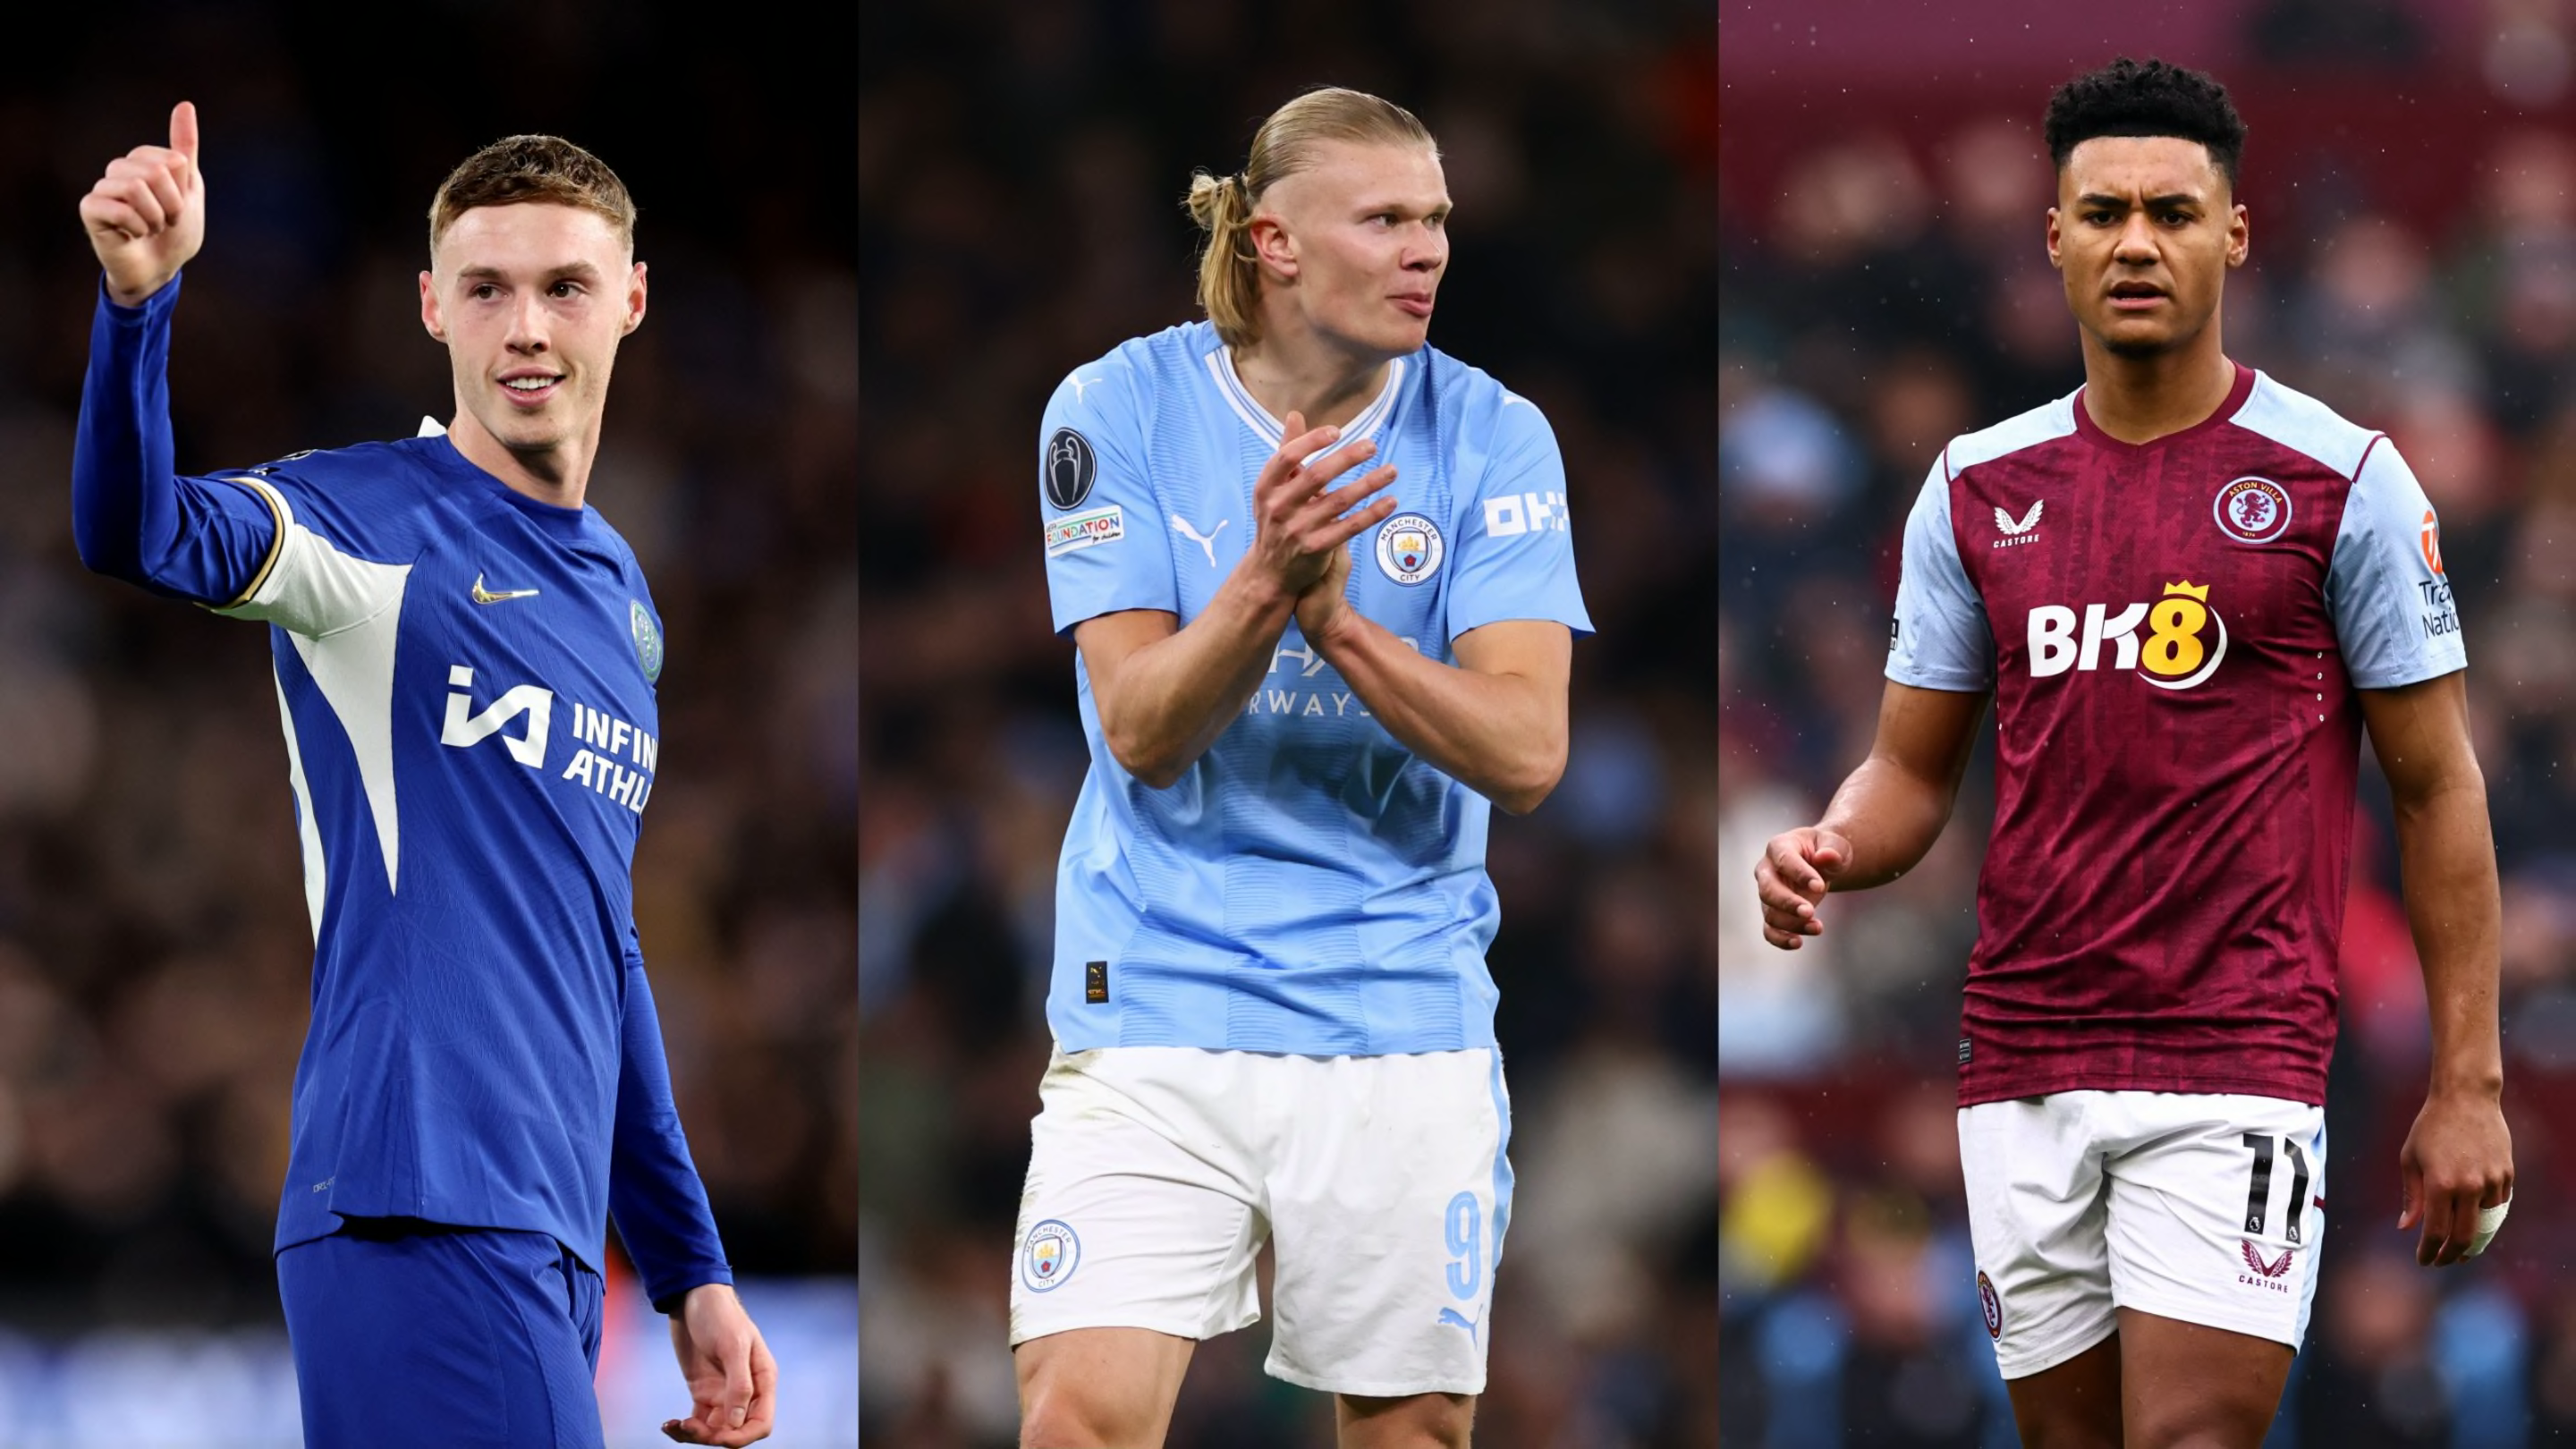 Football fans predict who will win the Premier League Golden Boot in YouGov poll